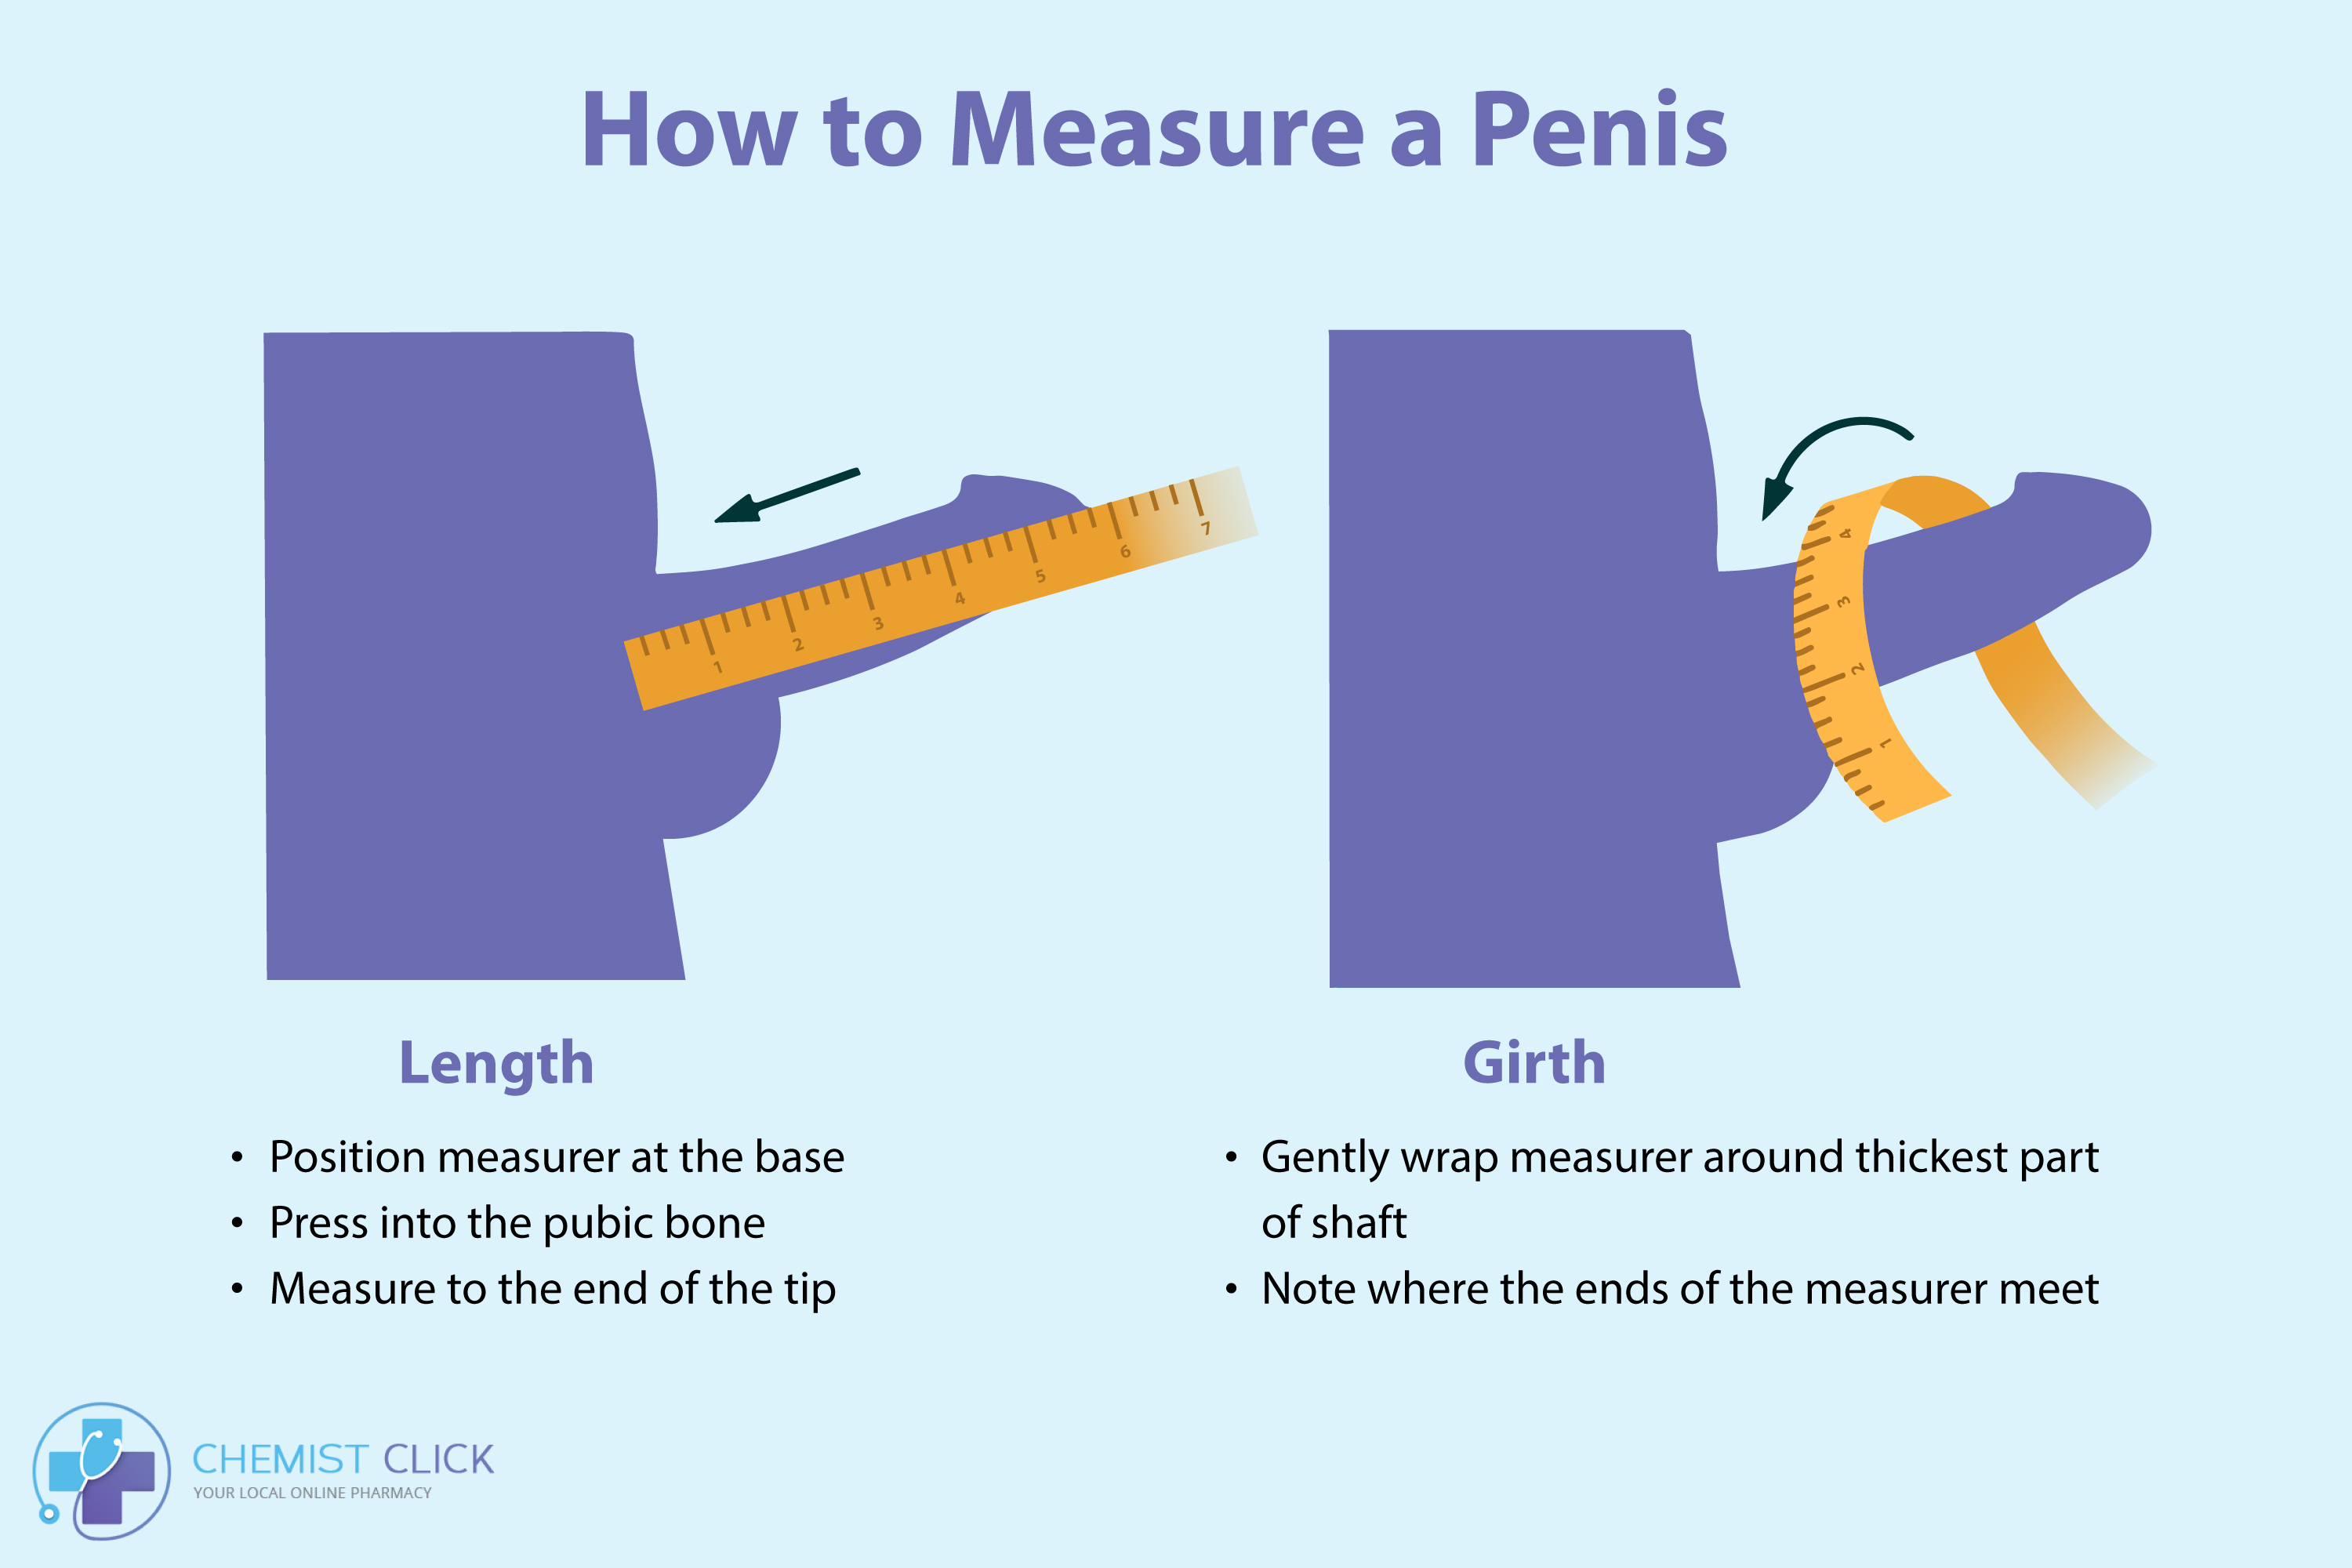 Whats a good gauge to measure dick size